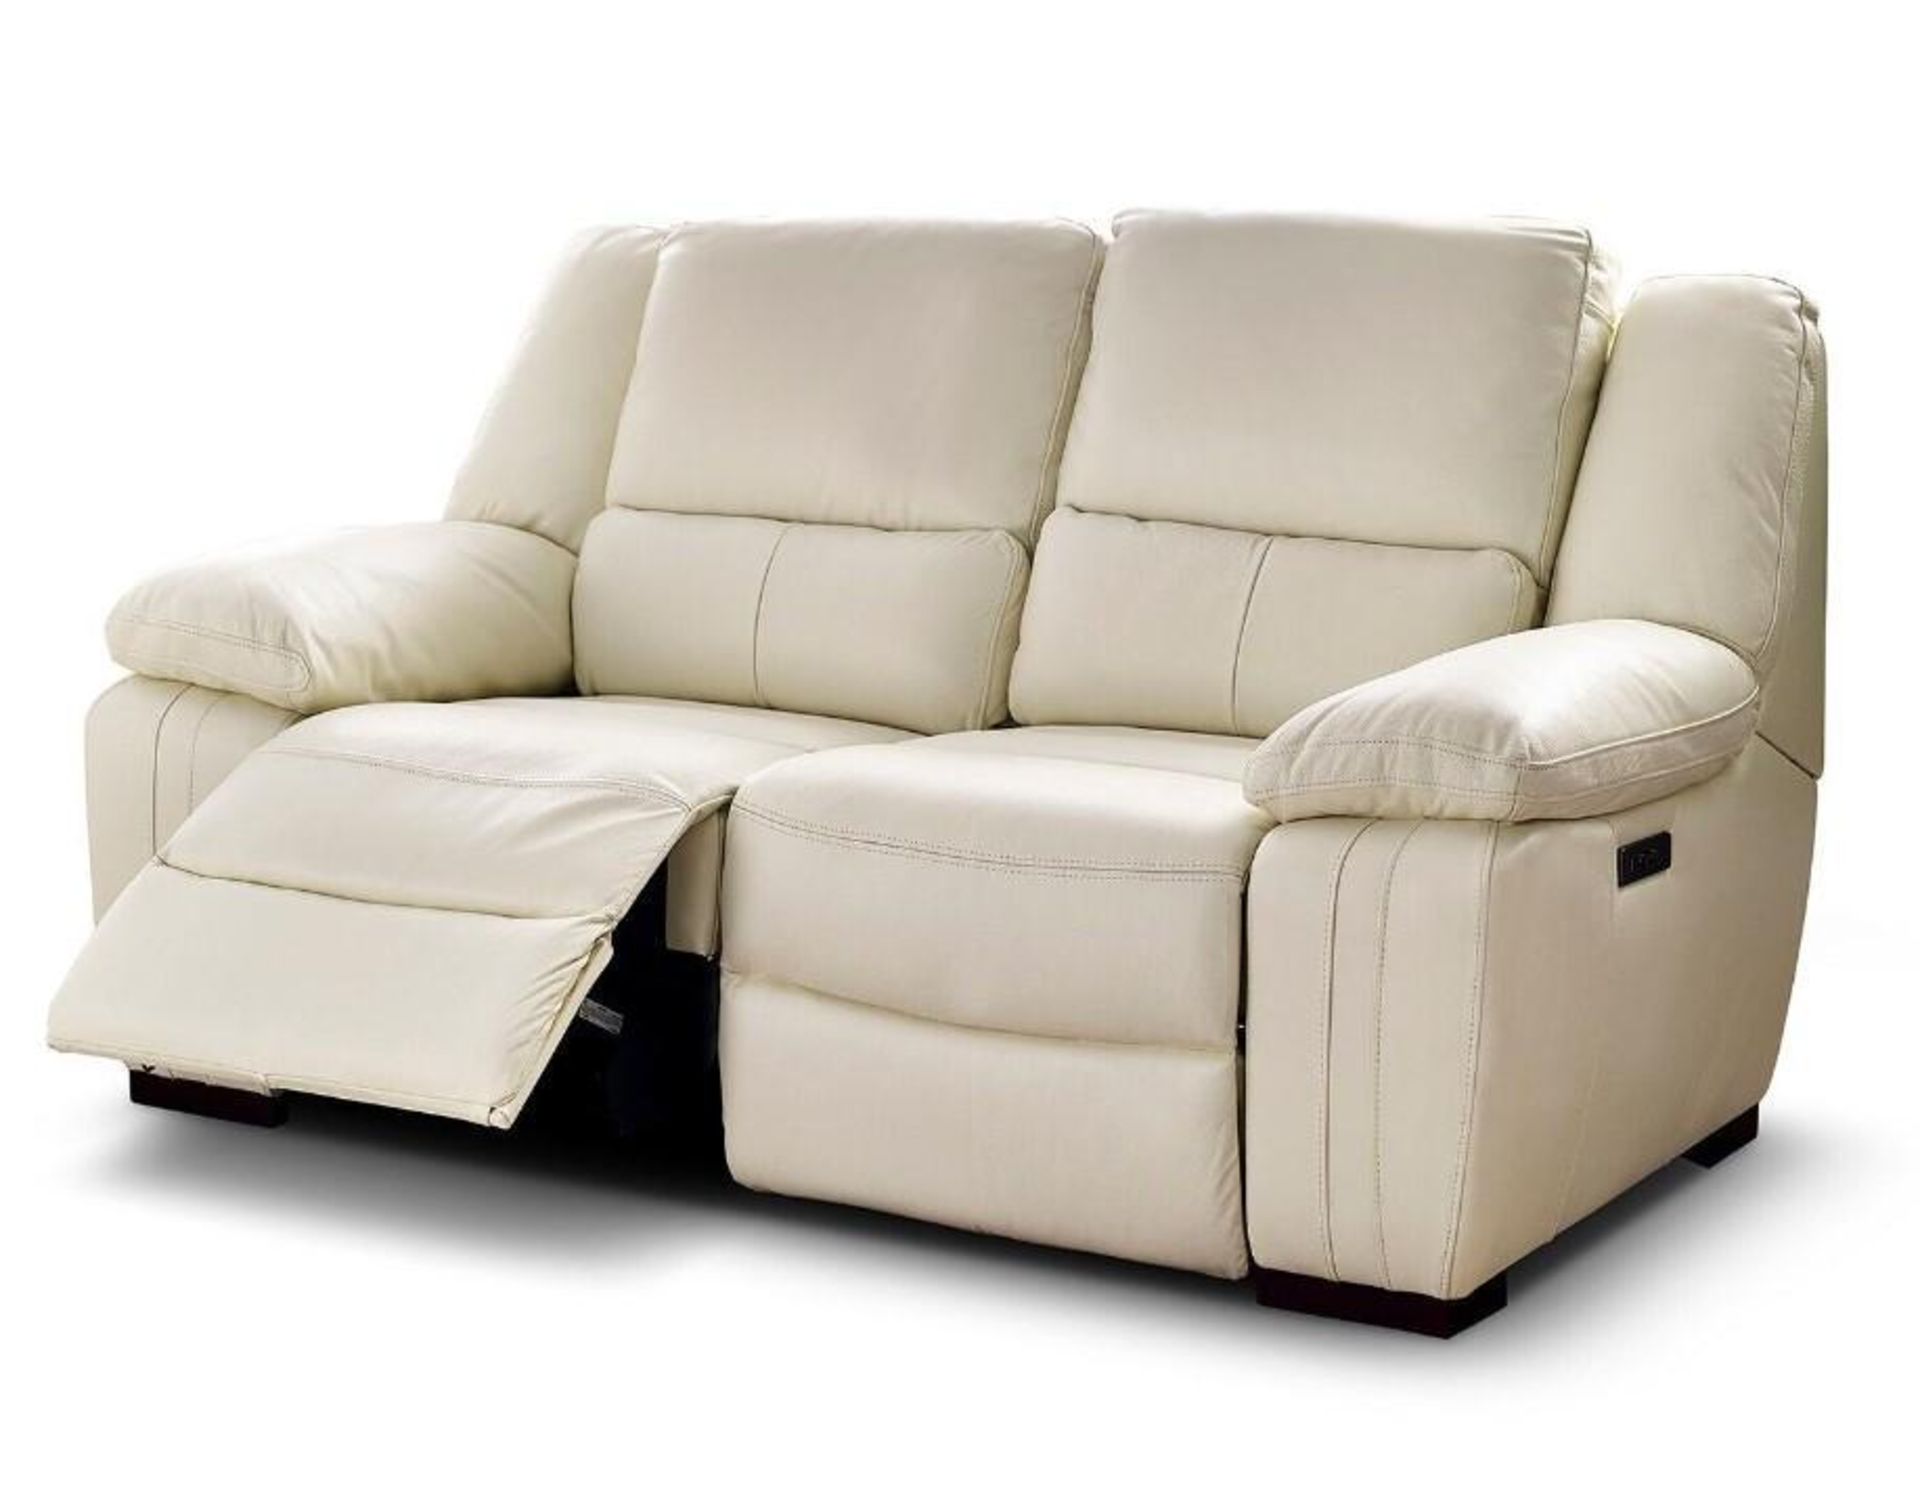 Brand new and boxed SCS Fallon 2 seater electric reclining sofa in Cream. - Image 2 of 7